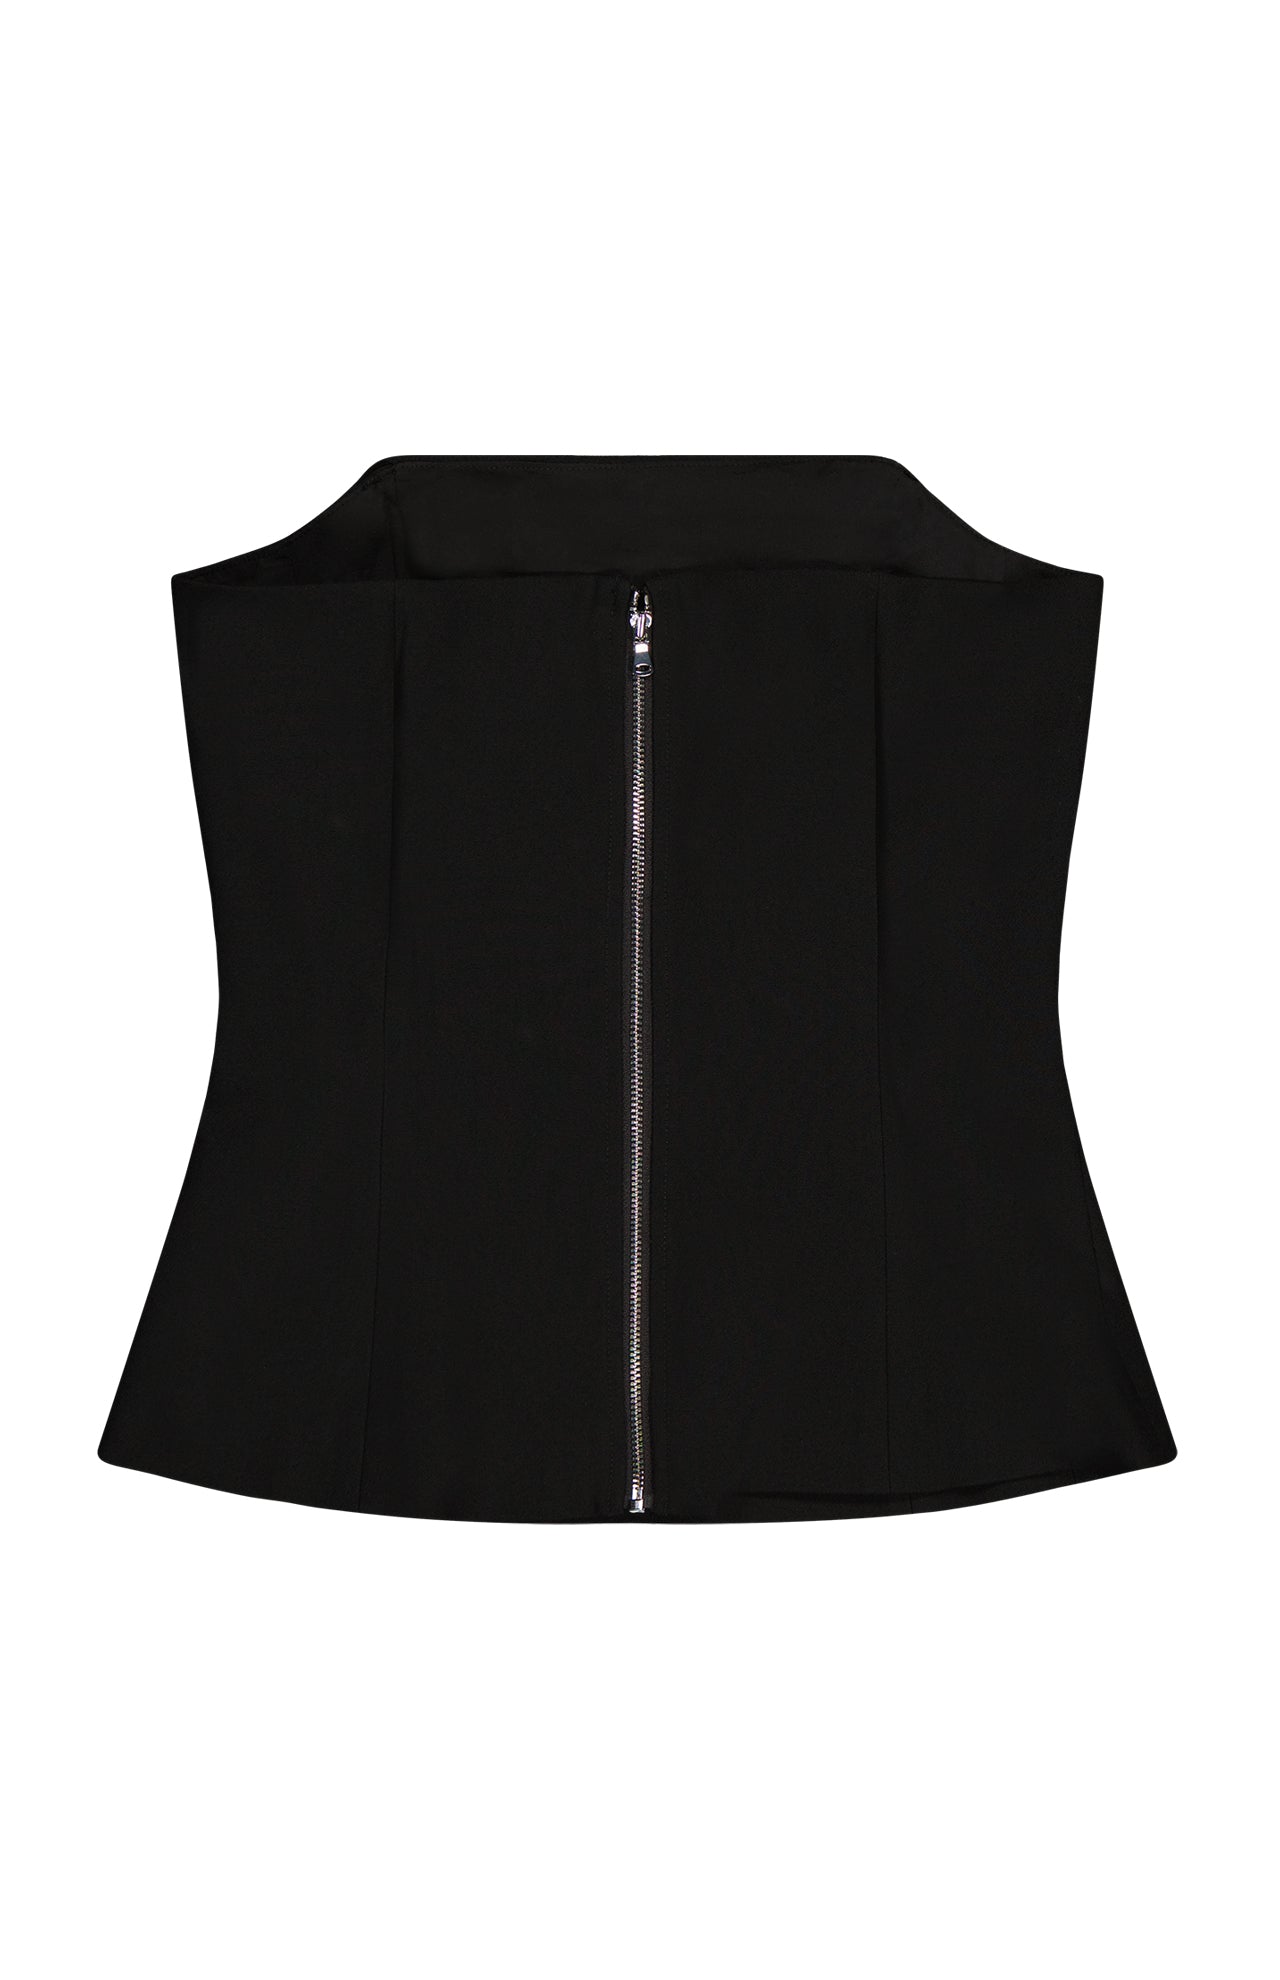 L'AGENCE Fay Strapless Bustier in Black